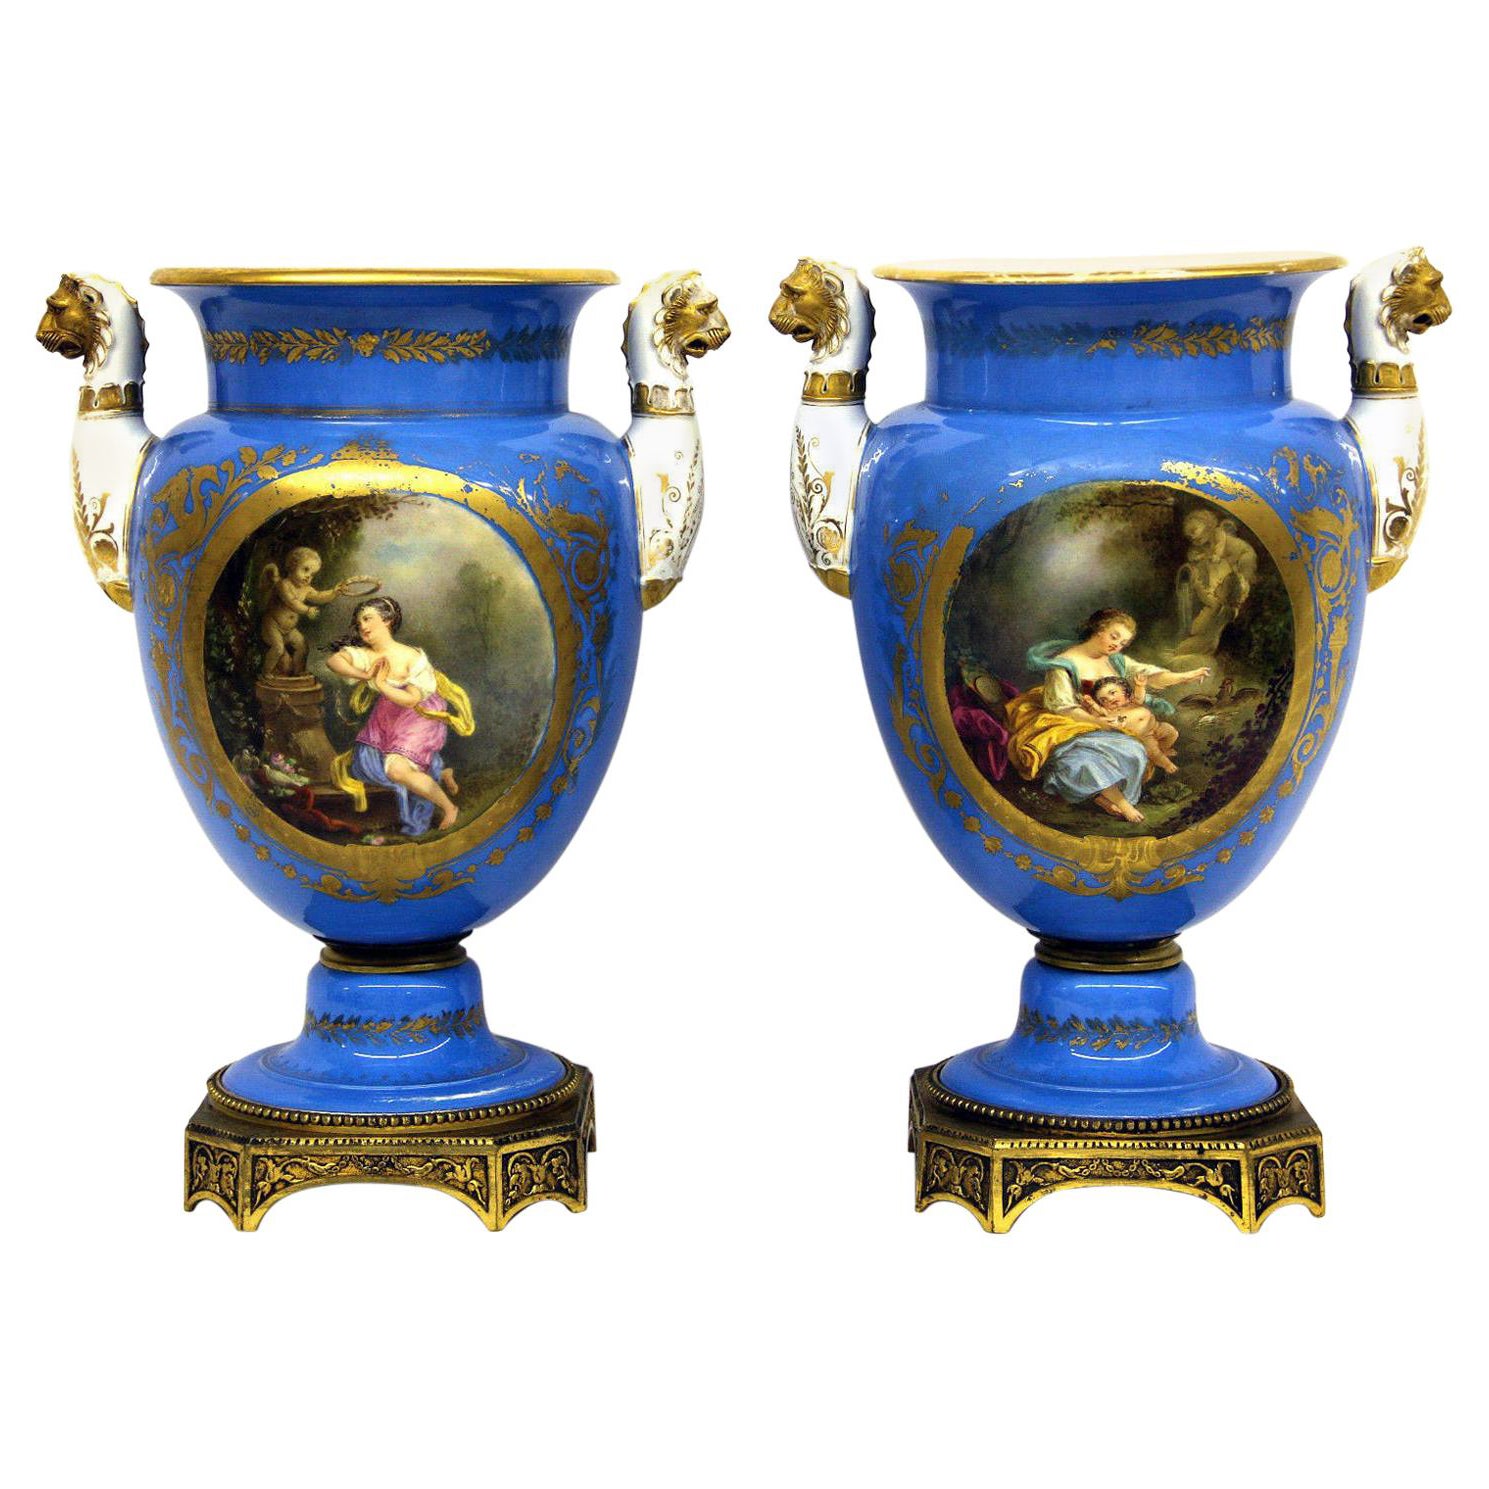 Pair of Late 19th Century Gilt Bronze and Sky Blue Sèvres Style Porcelain Vases